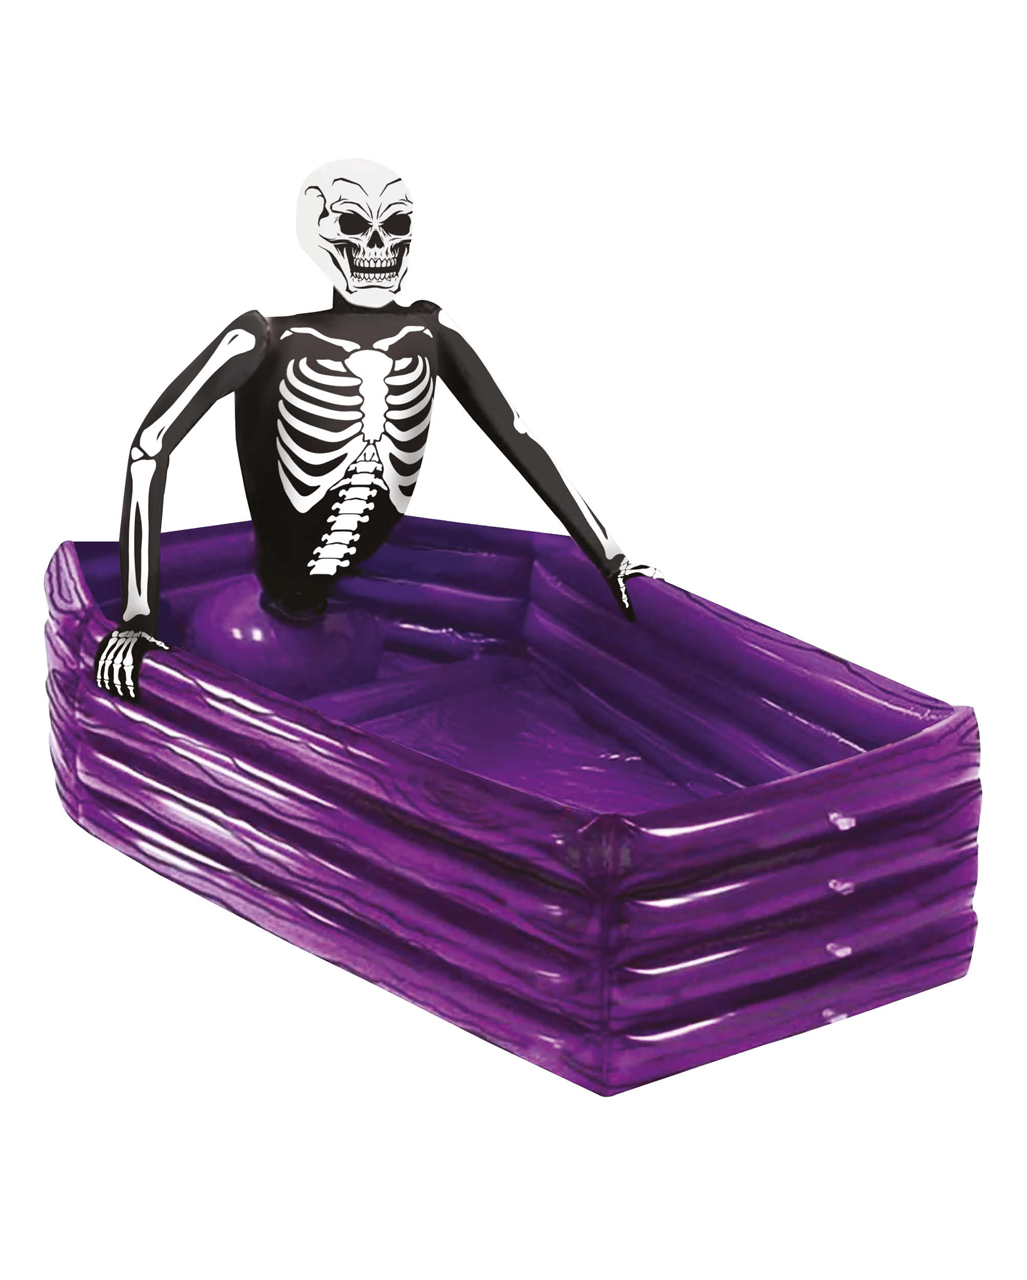 Skeleton In Coffin Drink Cooler Inflatable 100x35cm for Halloween